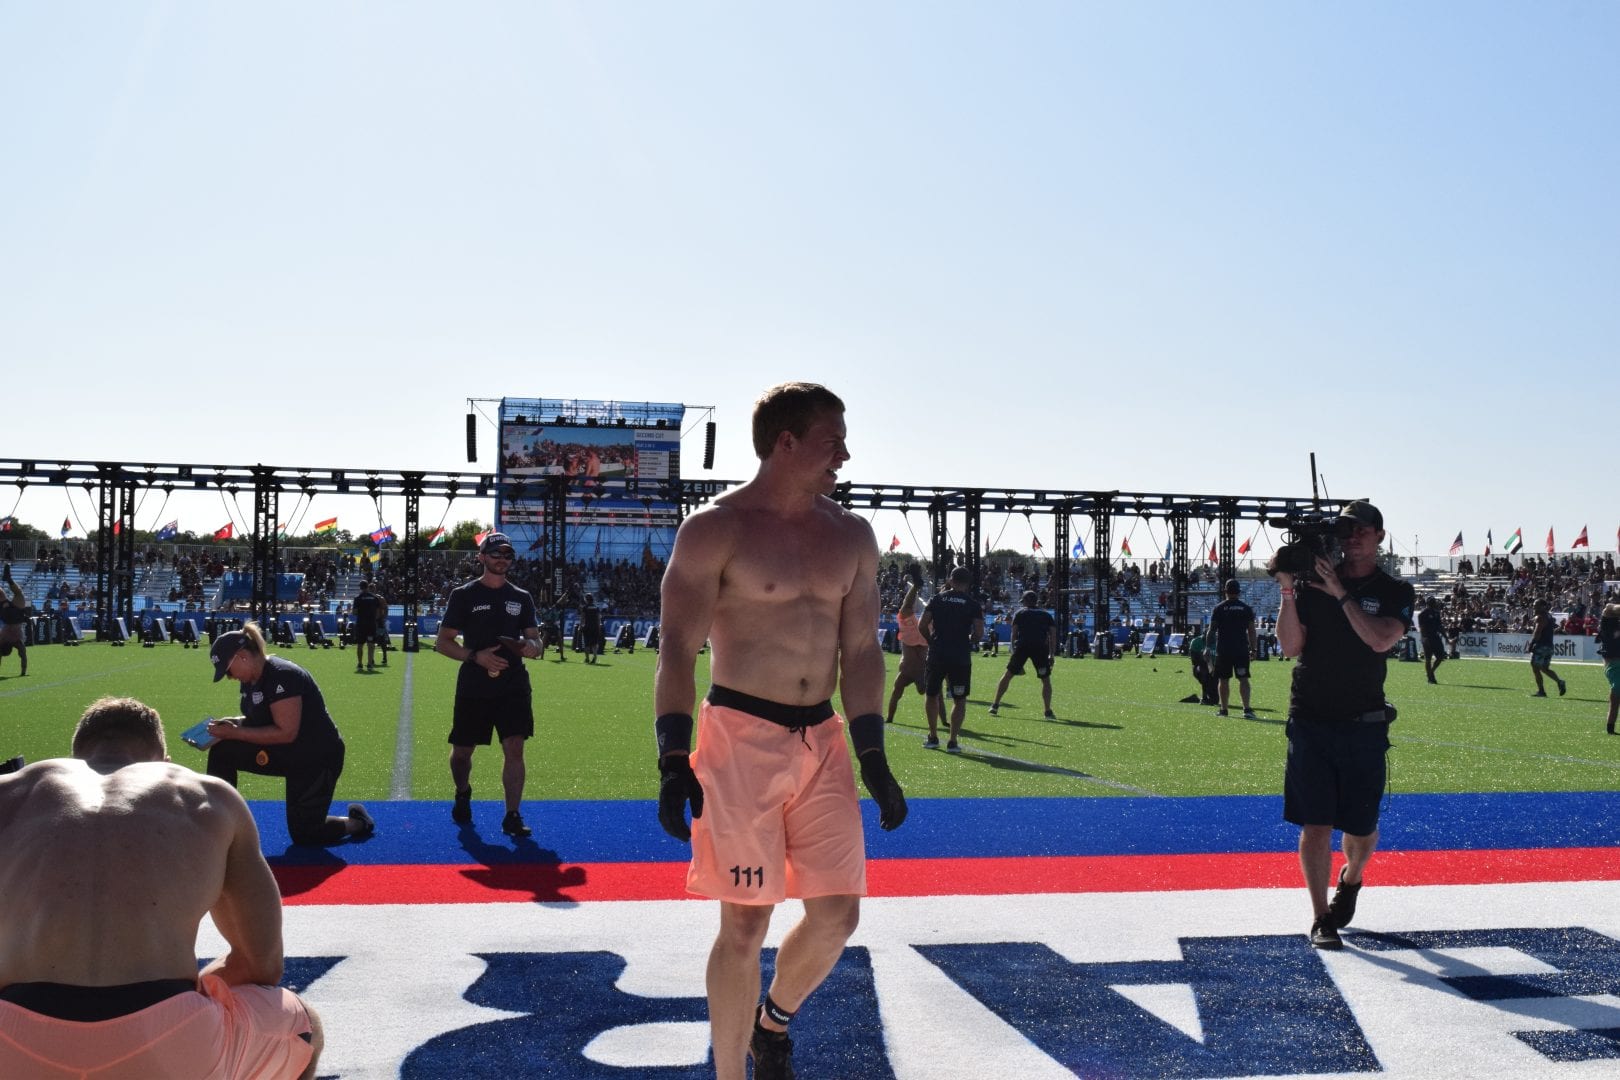 Samuel Kwant crosses the finish line in the second event fo the 2019 CrossFit Games